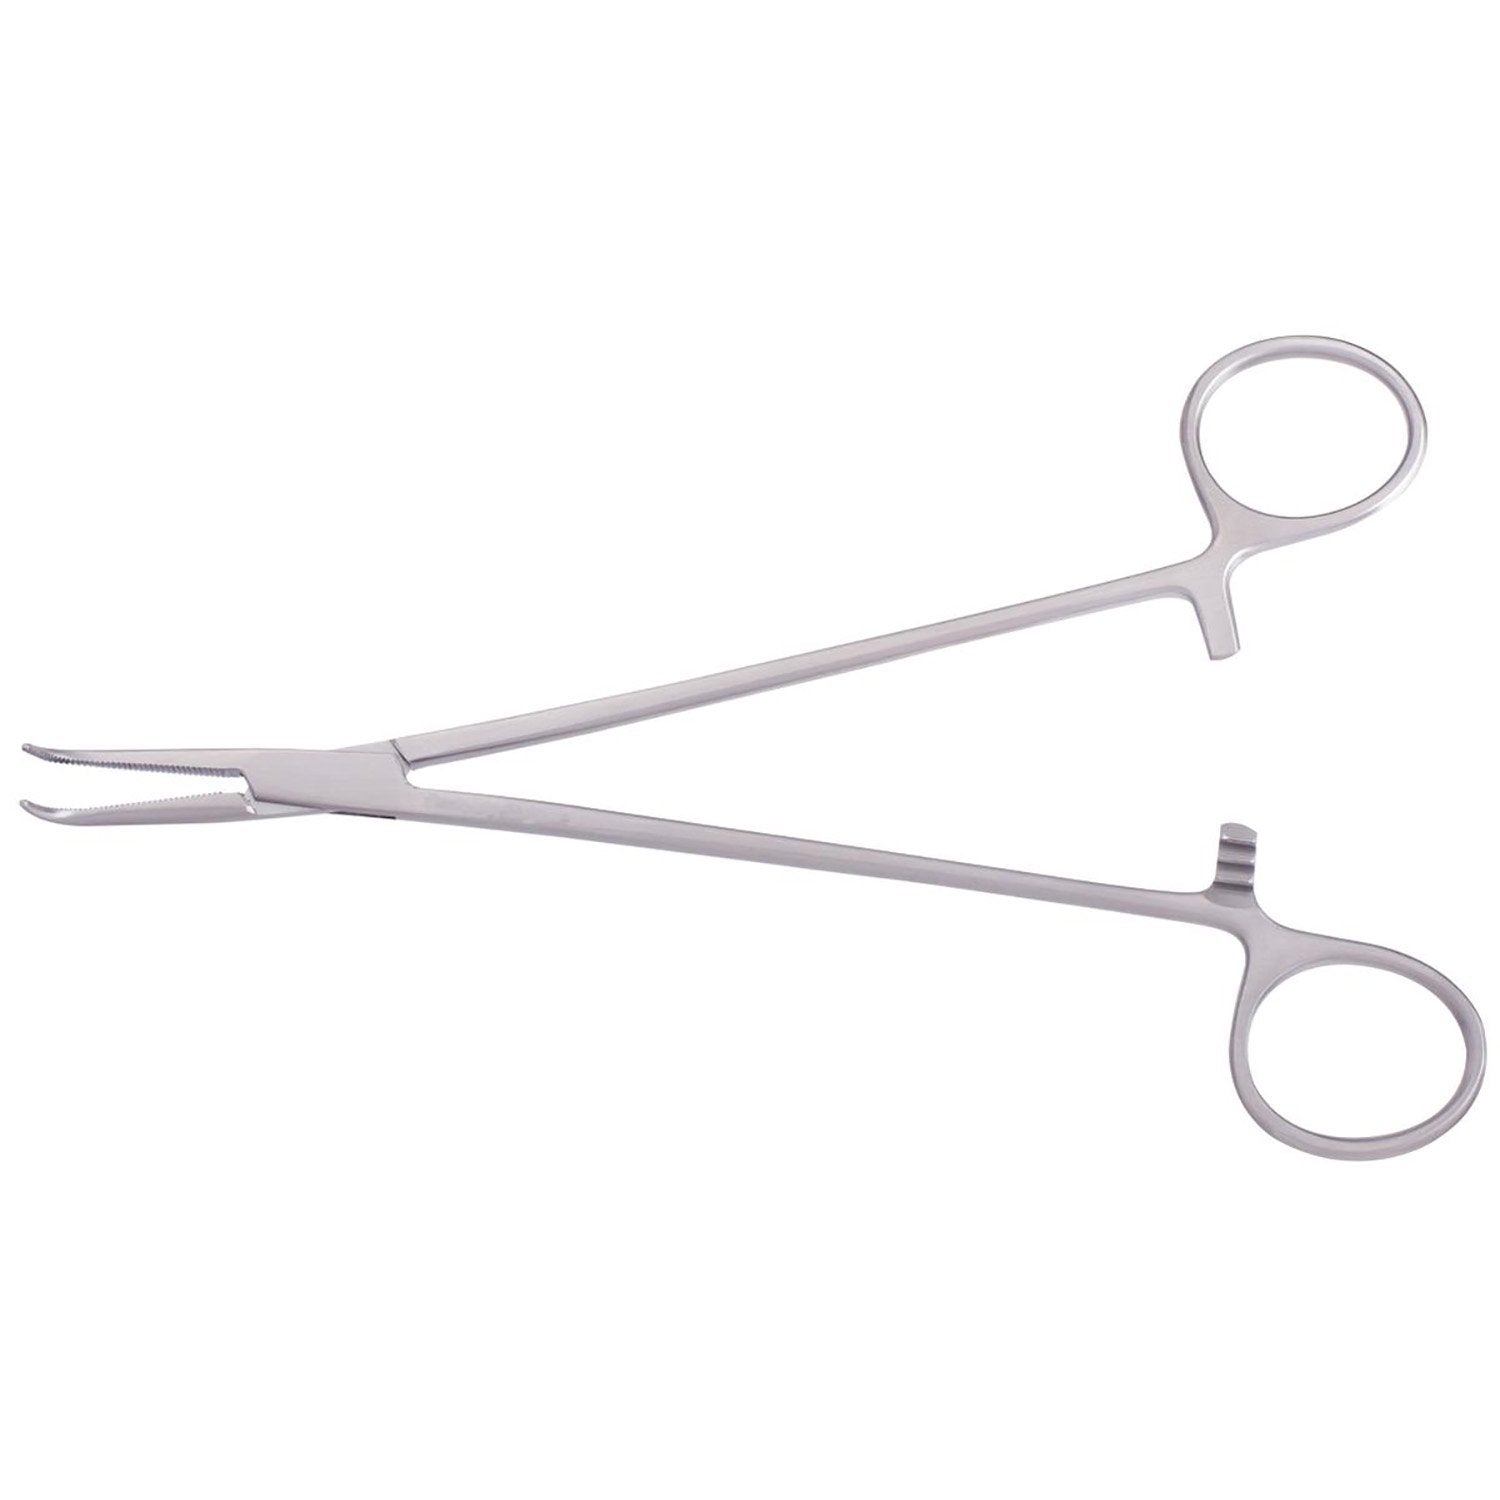 Mixter Thoracic Forceps